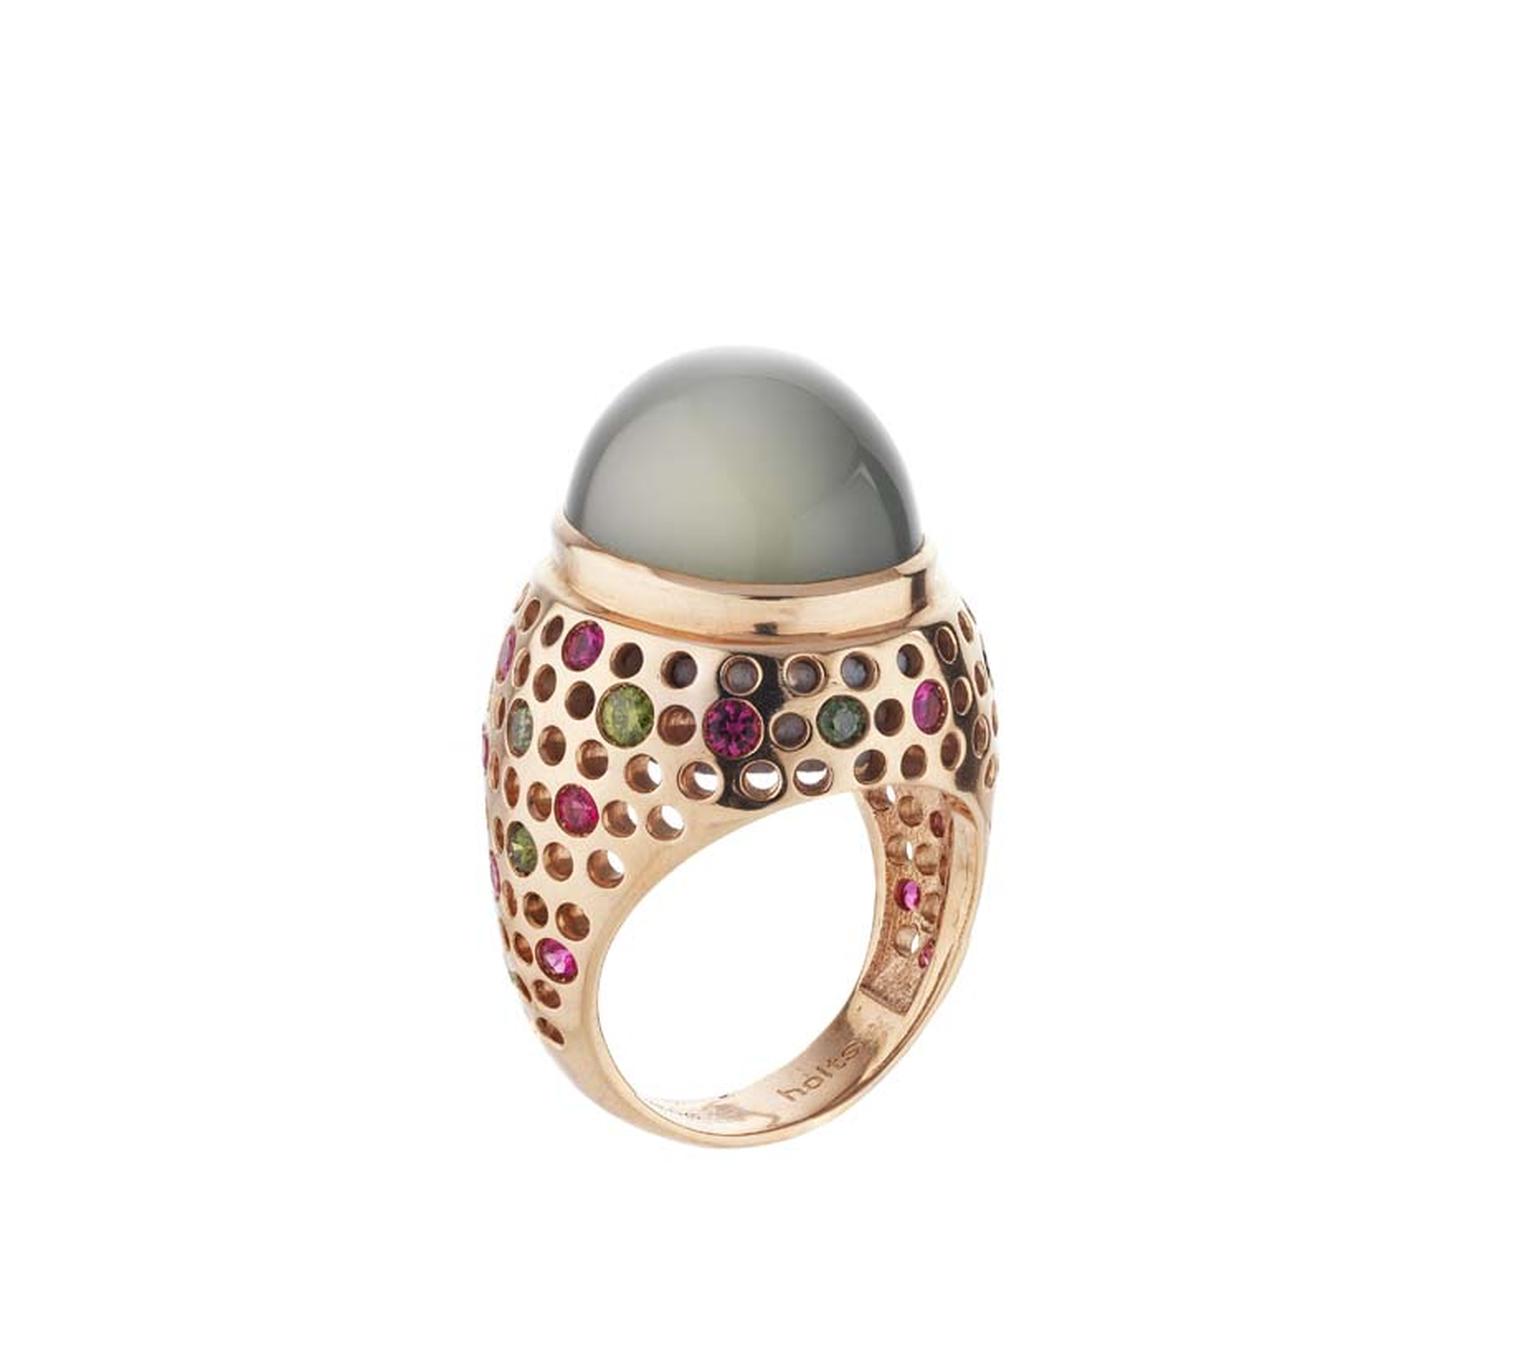 Holts London Vivienne ring with a central moonstone set in a rose gold band studded with natural pink spinels and green diamonds (£3,950).